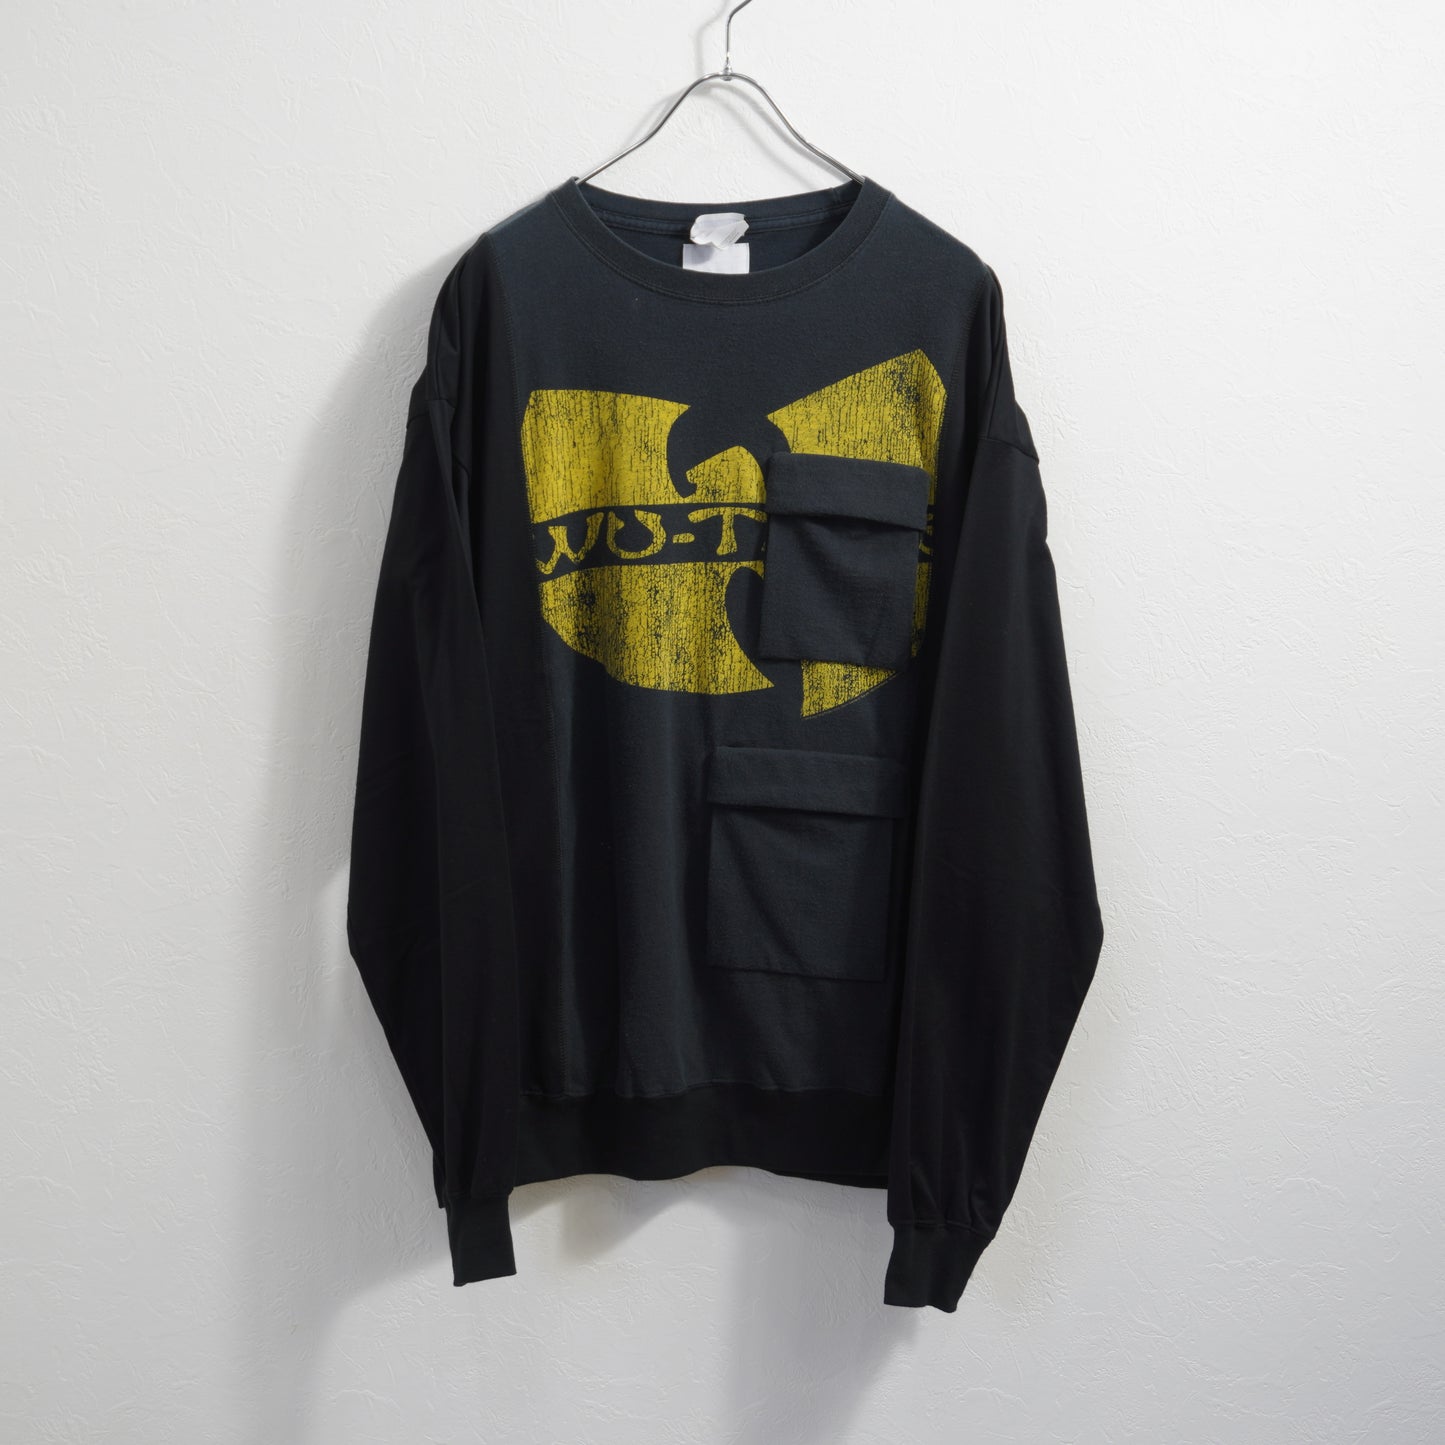 CHANGES Remake Band L/S Tee "WU-TANG CLAN"